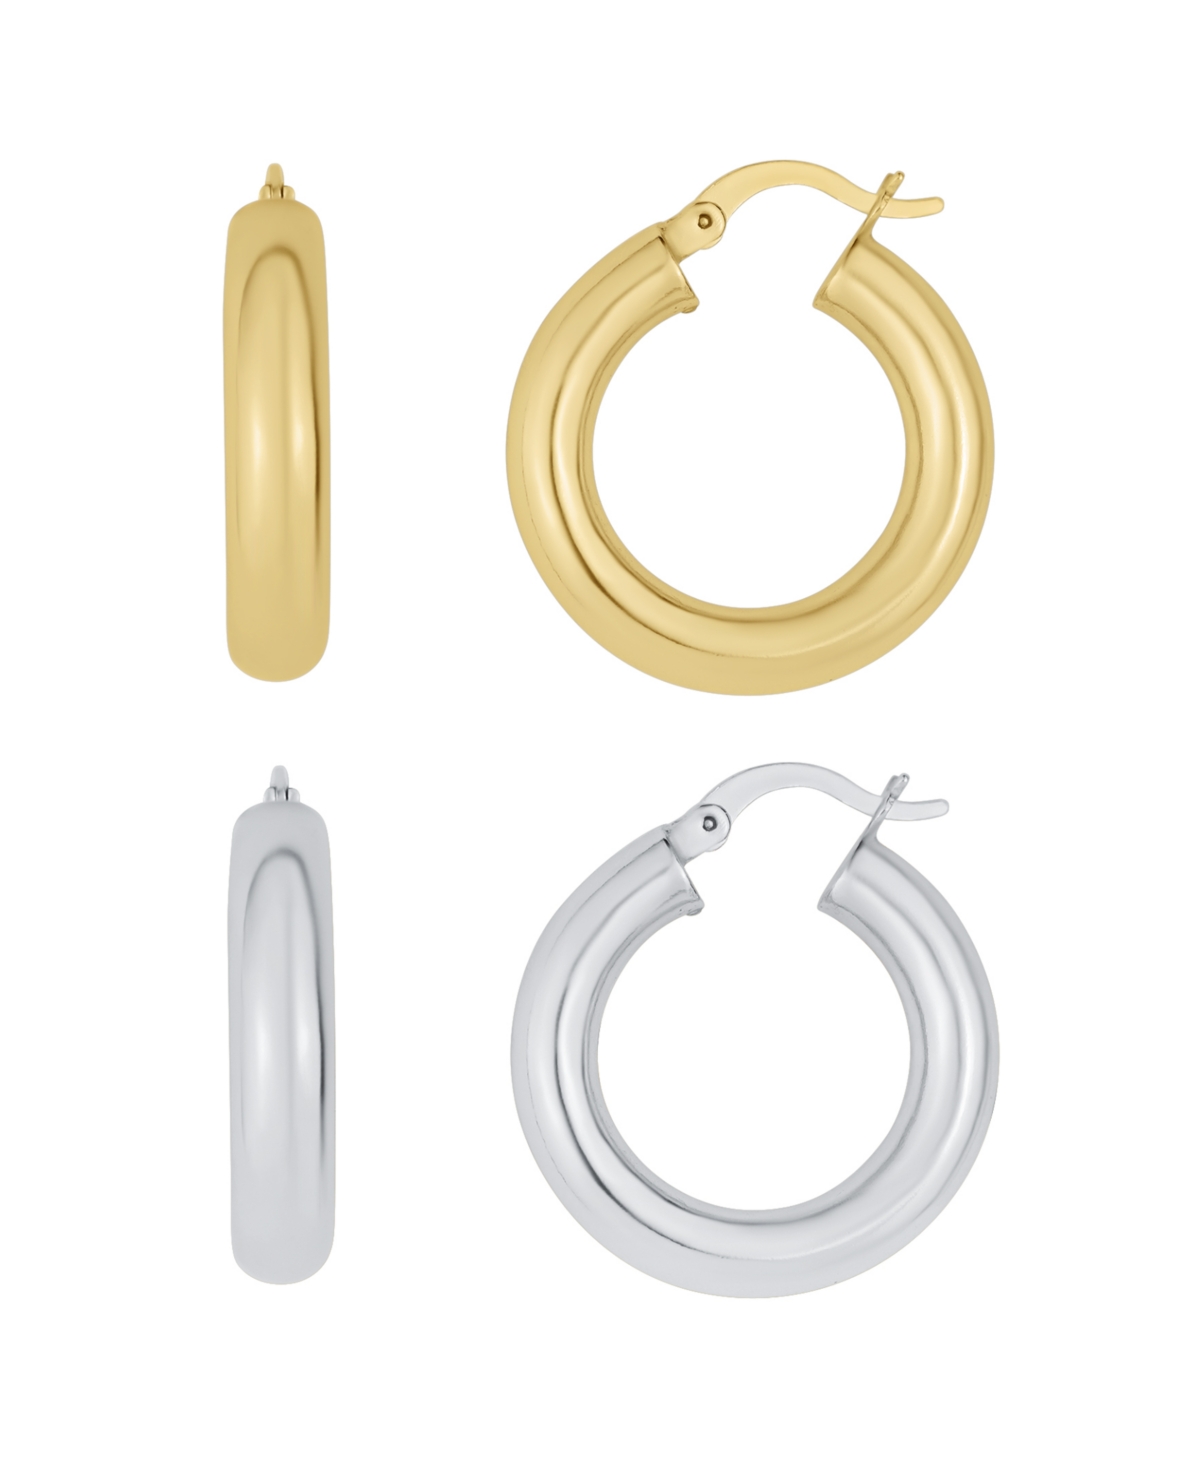 Silver Plated And 18K Gold Plated Duo Hoop Earring, 4 Pieces - Silver Plated and K Gold Plated Over Bra